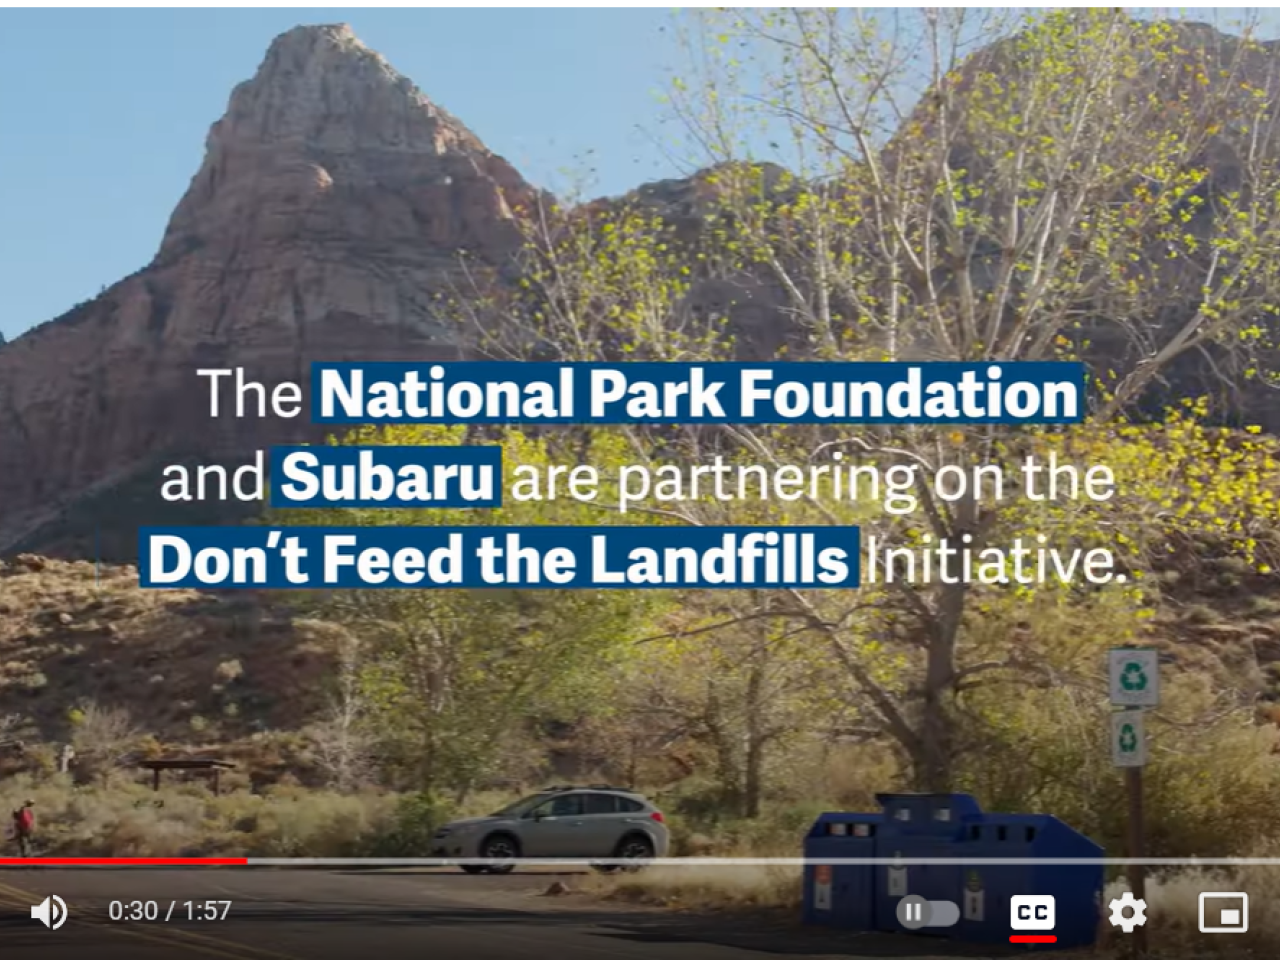 The National Park Foundation and Subaru are partnering on the Don't Feed the Landfills Initiative